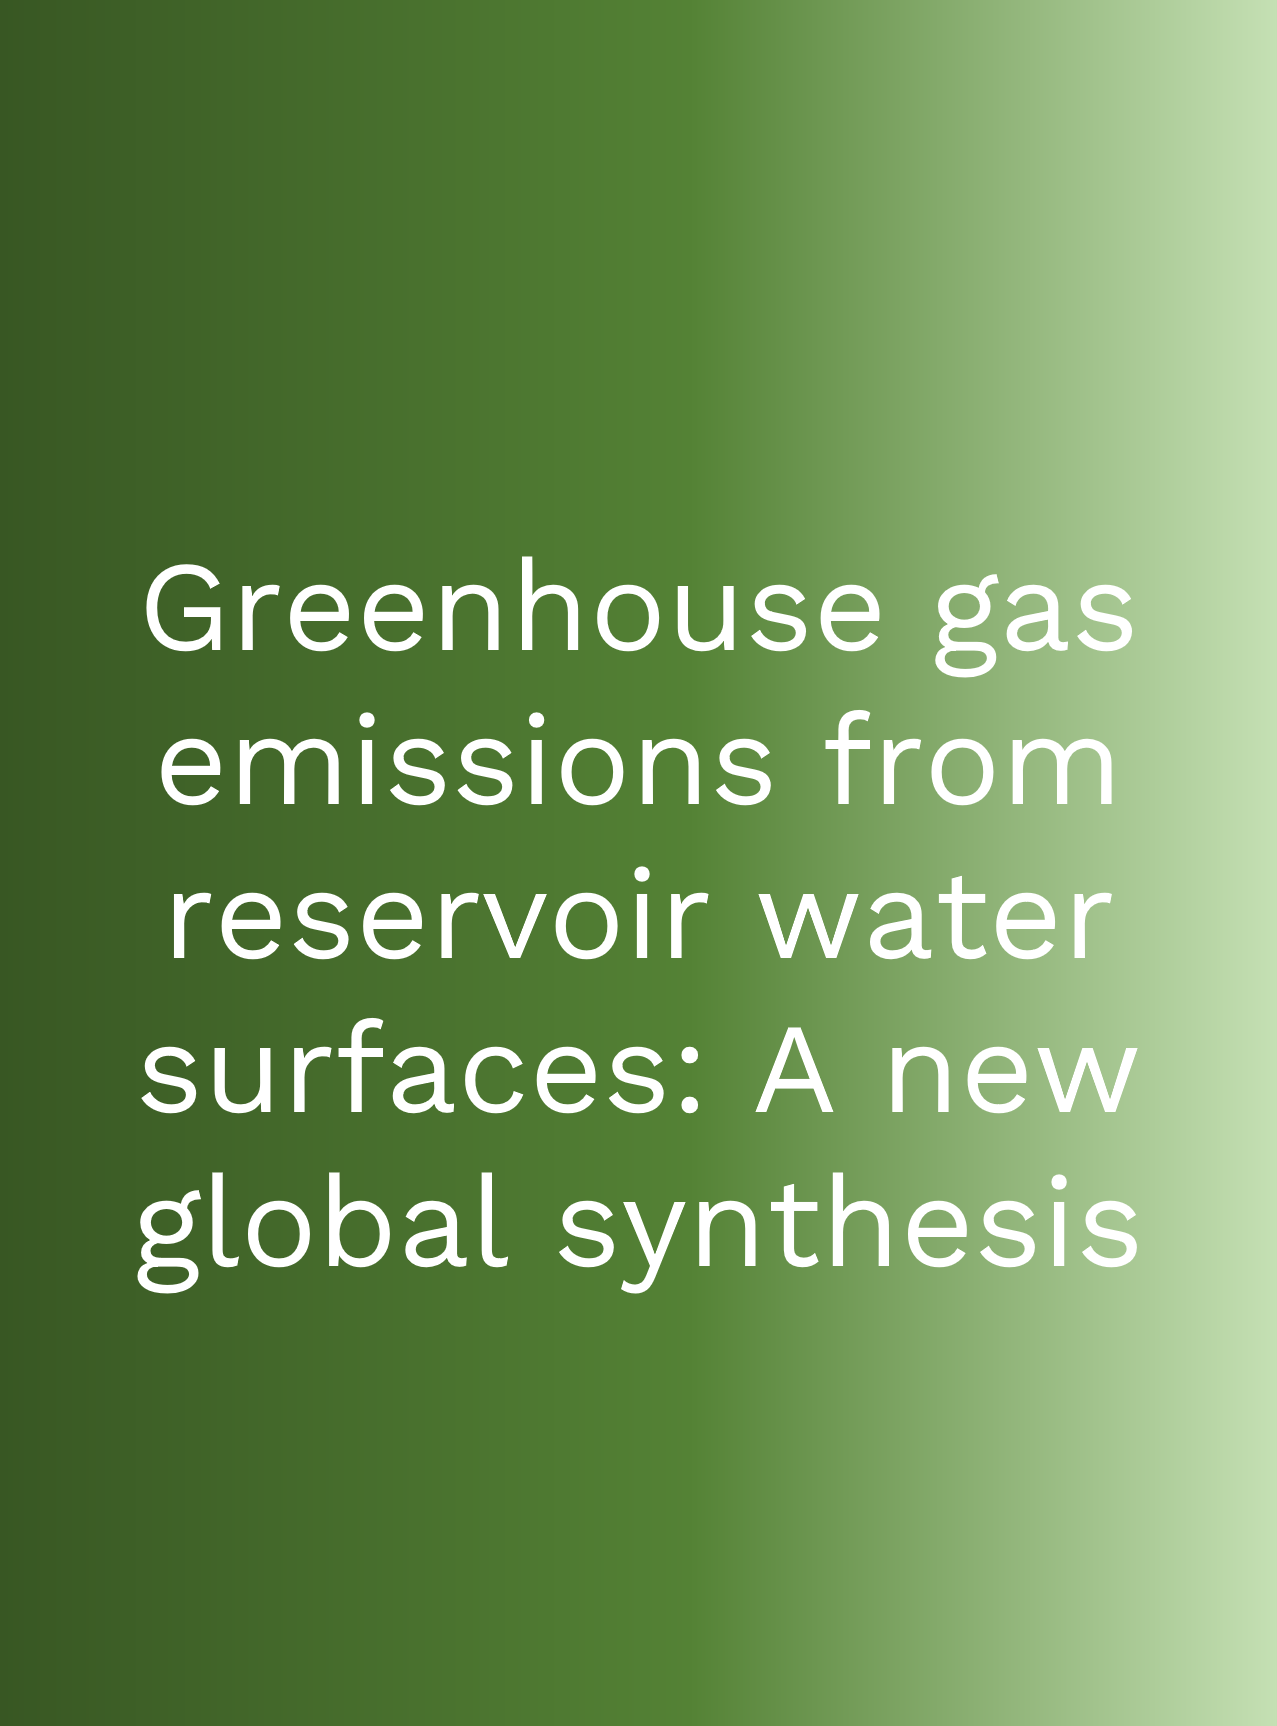 Greenhouse gas emissions from reservoir water surfaces: A new global synthesis